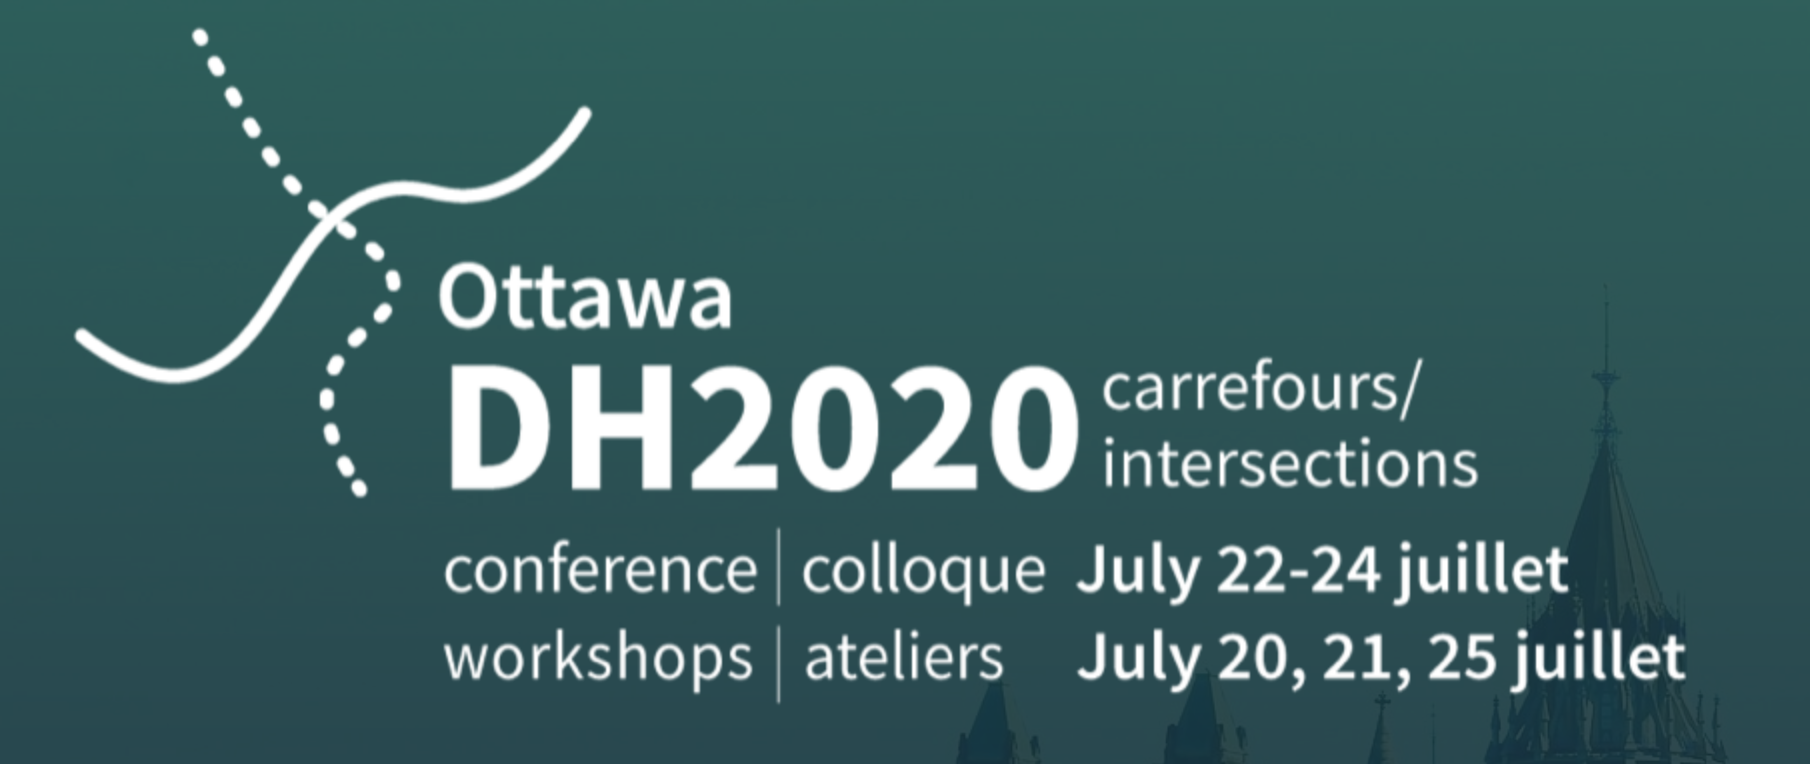 DH2020 carrefours/intersections